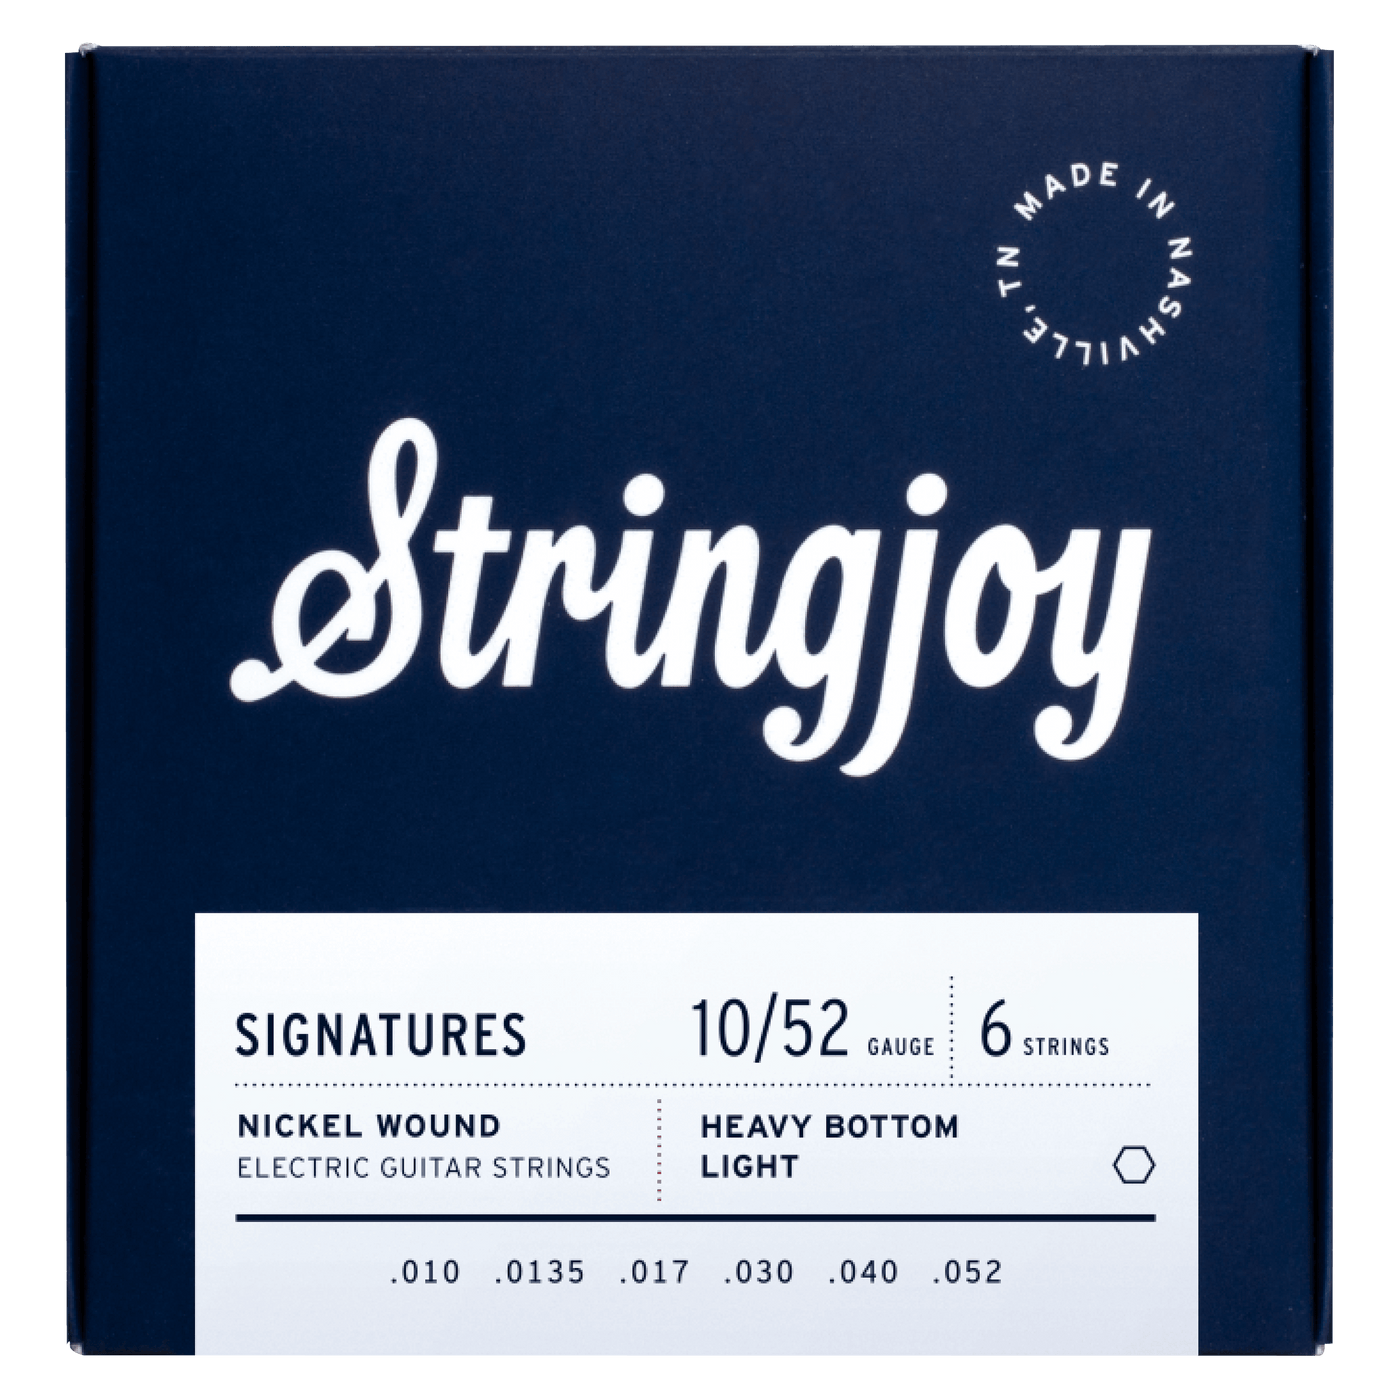 Stringjoy - L. Top H. Botton (10-52) - $19990 - Gearhub - Ah, so you like a set of strings that packs a punch, do ya? You like to pick heavy on the bottom but still want to be able to bend up top? Well then, our Heavy Bottom 10s are just the strings for you.This set addresses the two tension issues that arise in typical 10-52 sets: the 2nd string is too light, and the 5th string is too heavy. We fix the top end by subbing in a .0135 for the typical .013, bringing perfect balance to all the plain strings. Th